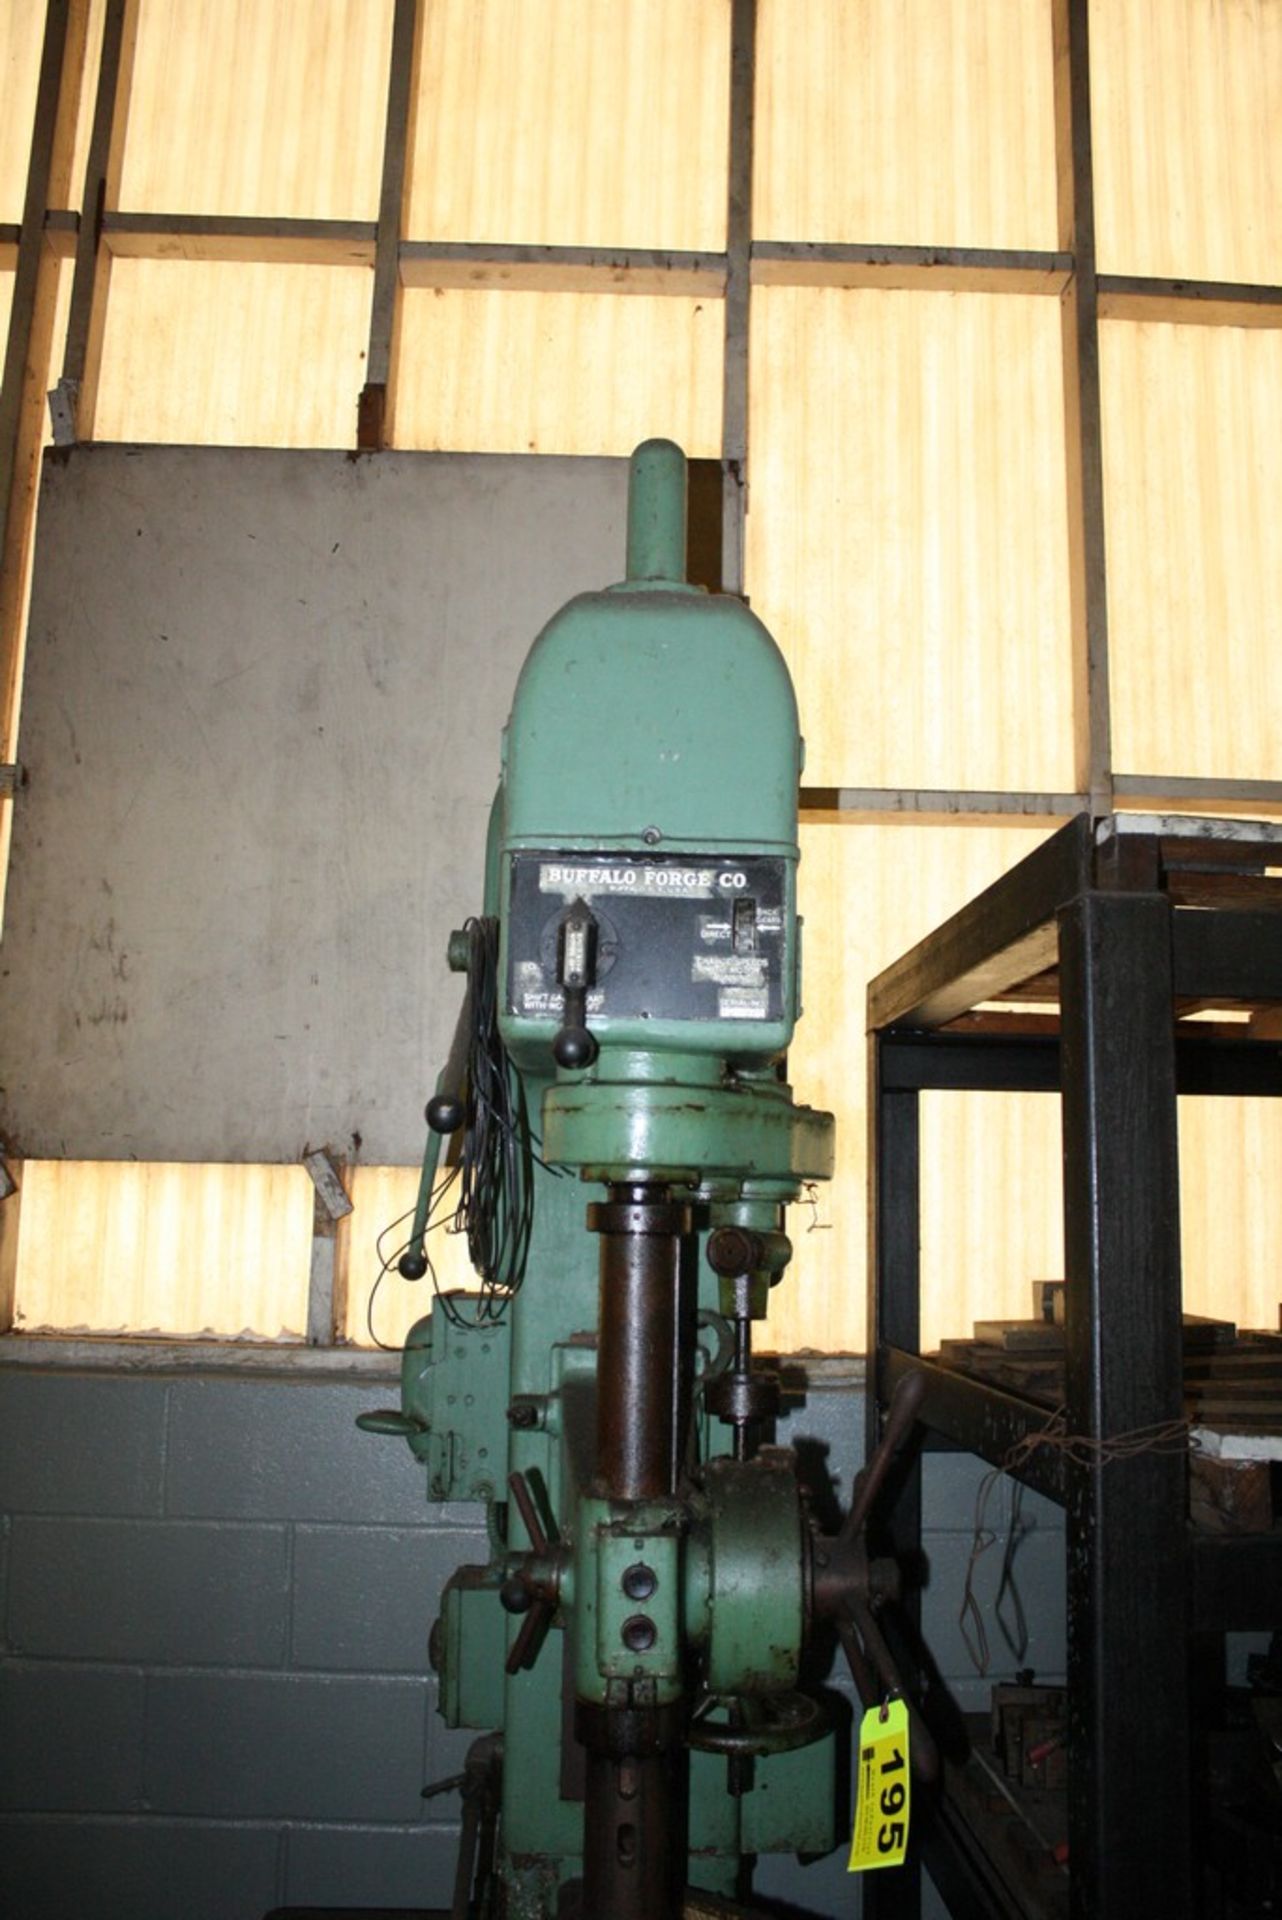 BUFFALO FORGE 26" PRODUCTION DRILL PRESS WITH POWER FEED S/N 62-875 - Image 2 of 4